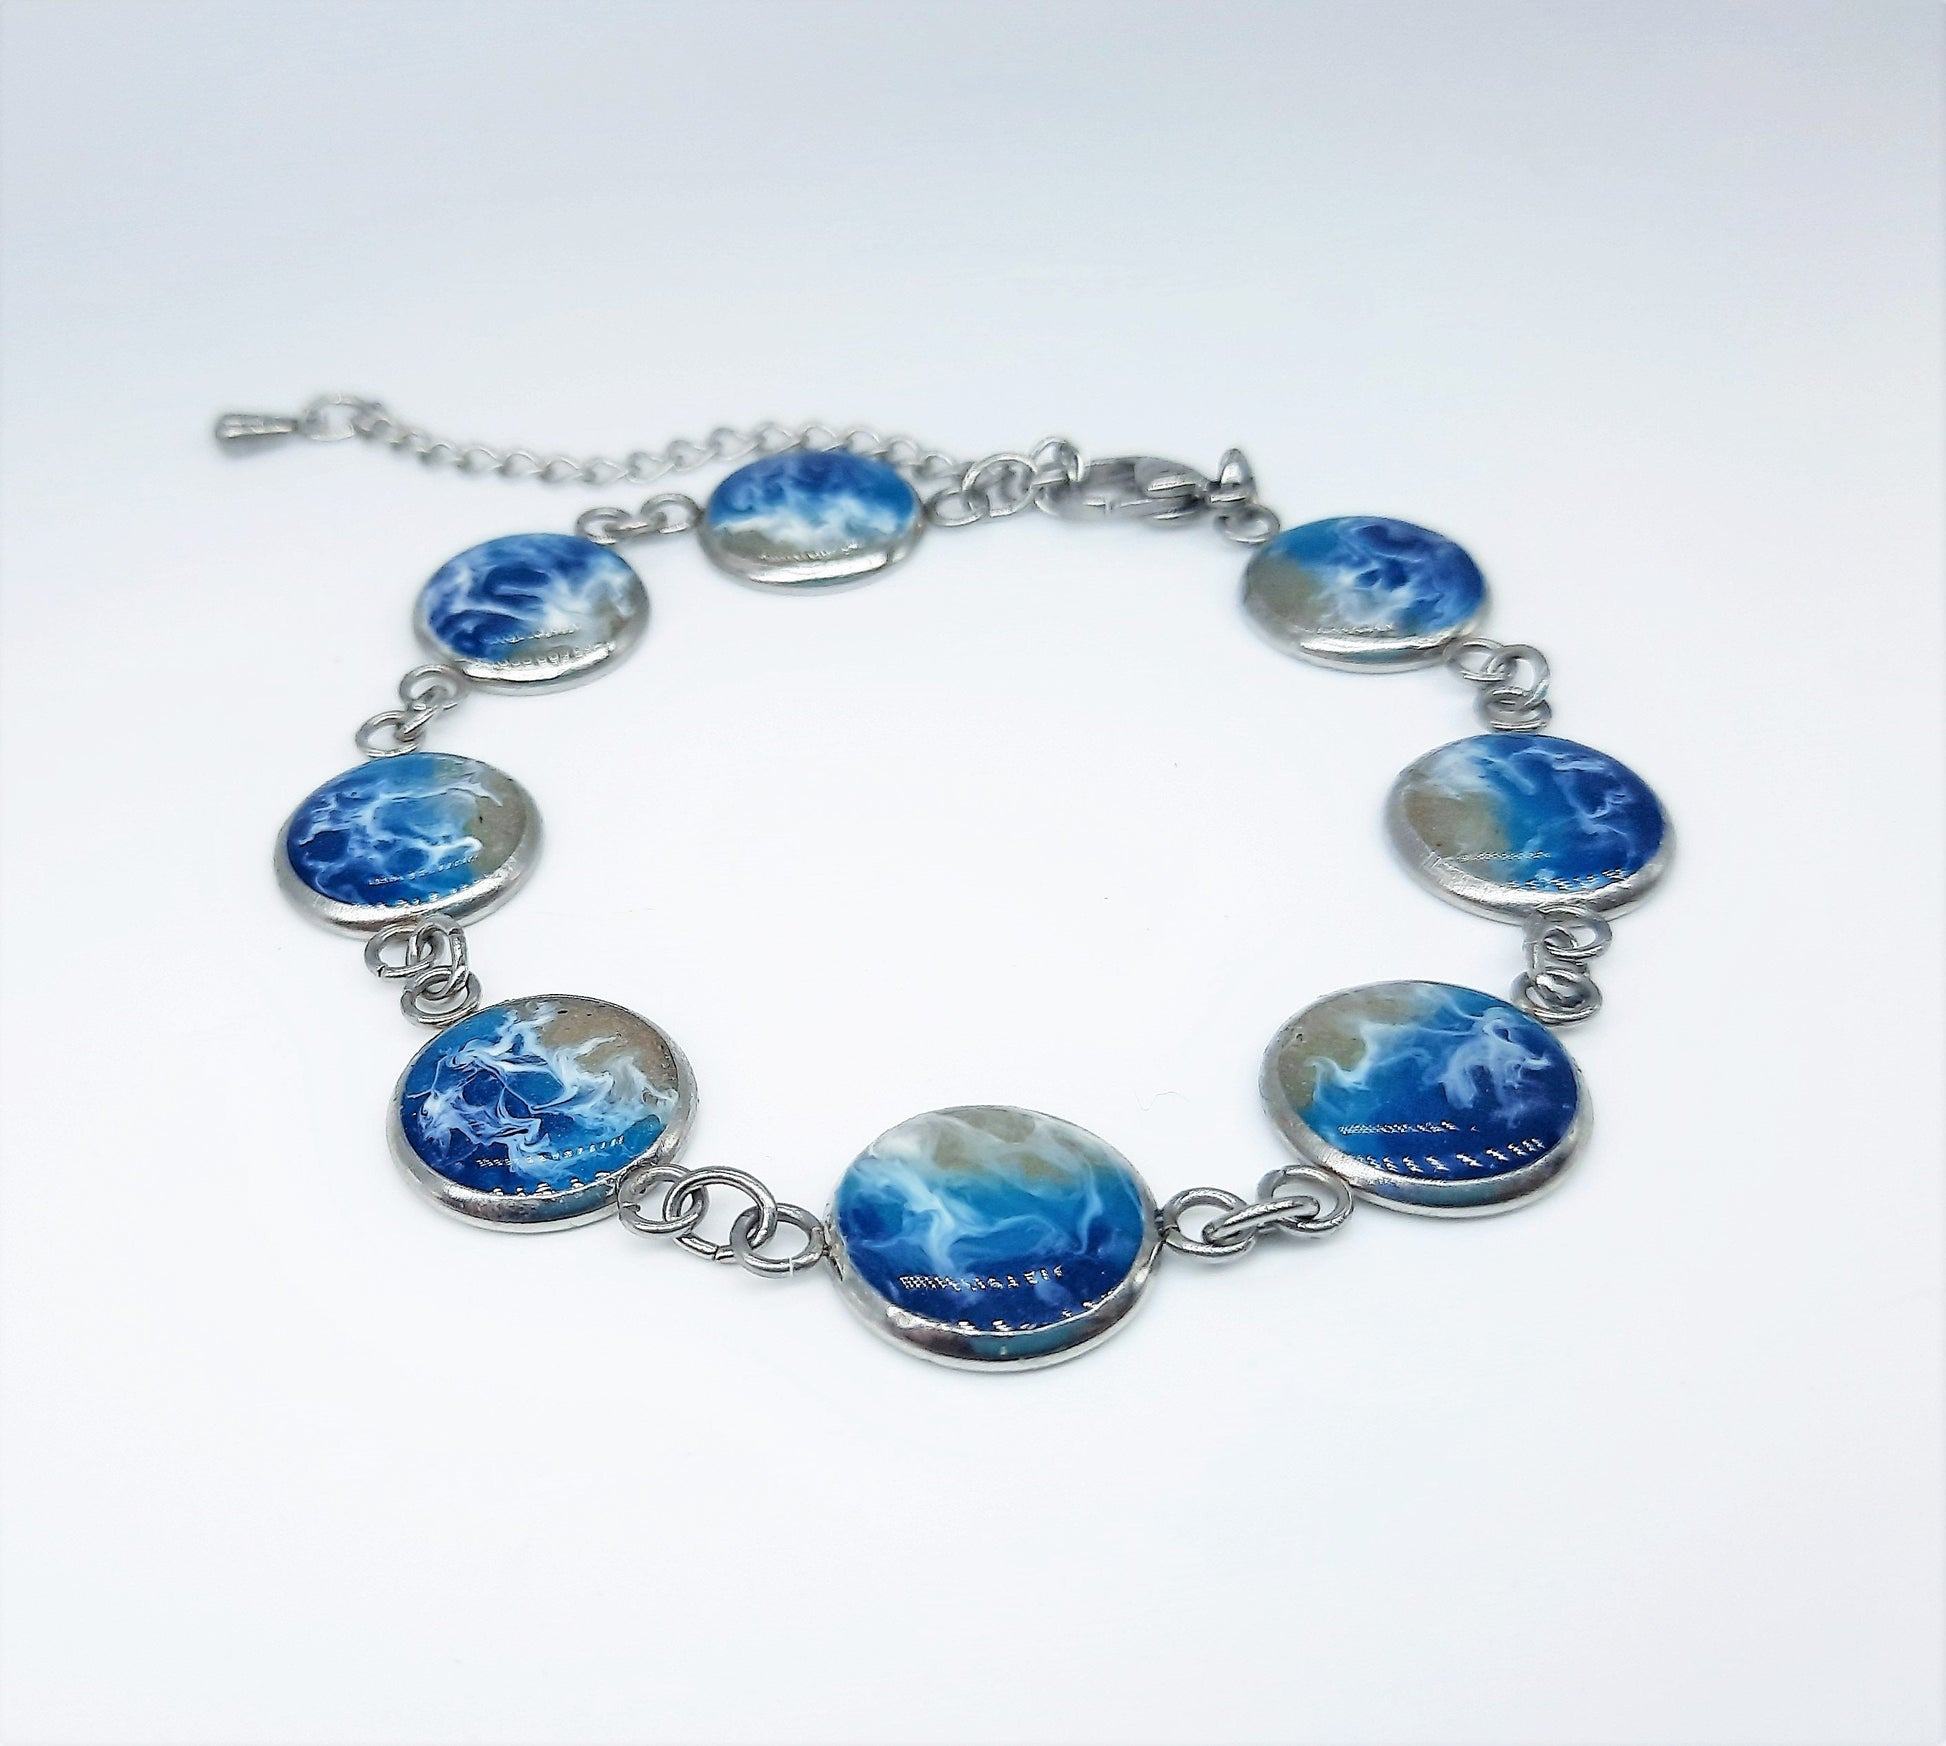 Resin Waves Ocean Bracelet / Beach Scene, Silver Stainless Steel Link Bracelet, Made with Real Sand, Resin, and Mica - NOT PHOTOGRAPHS!